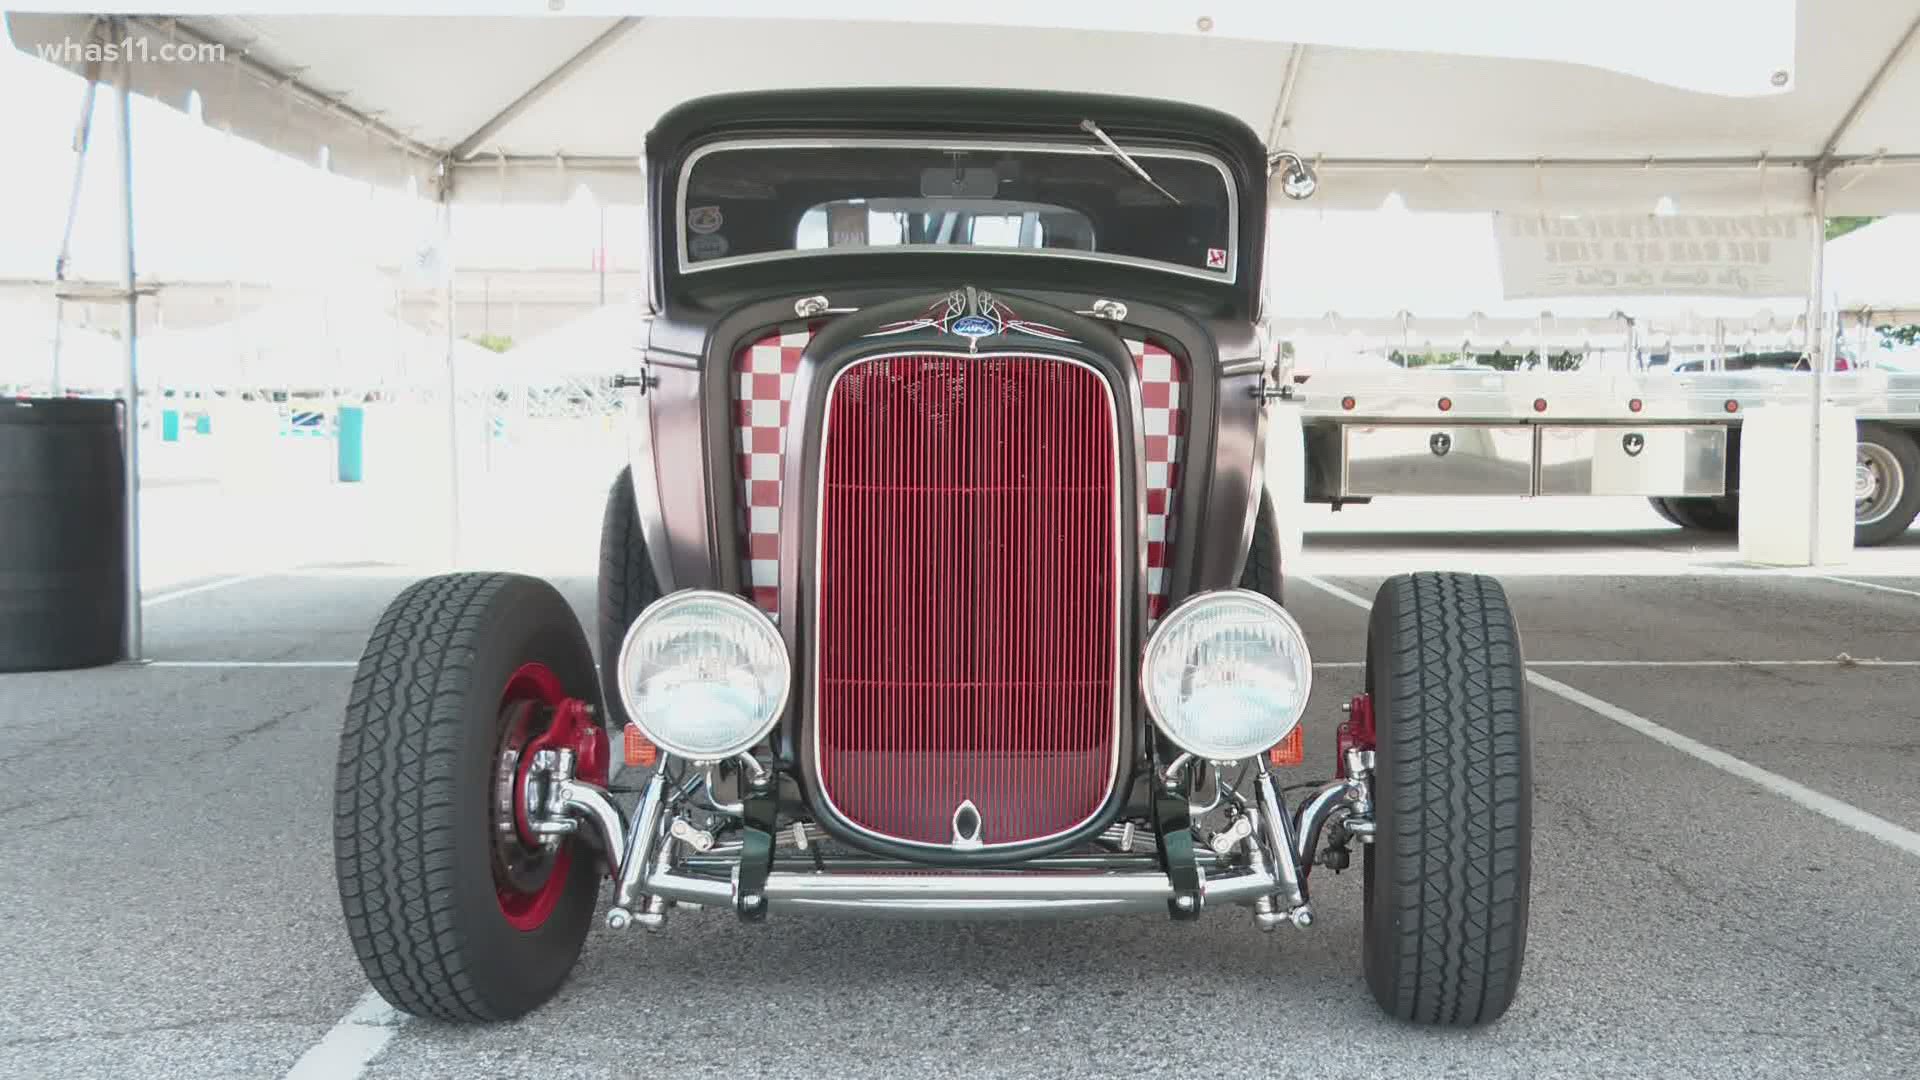 Louisville expects thousands for Street Rod Nationals